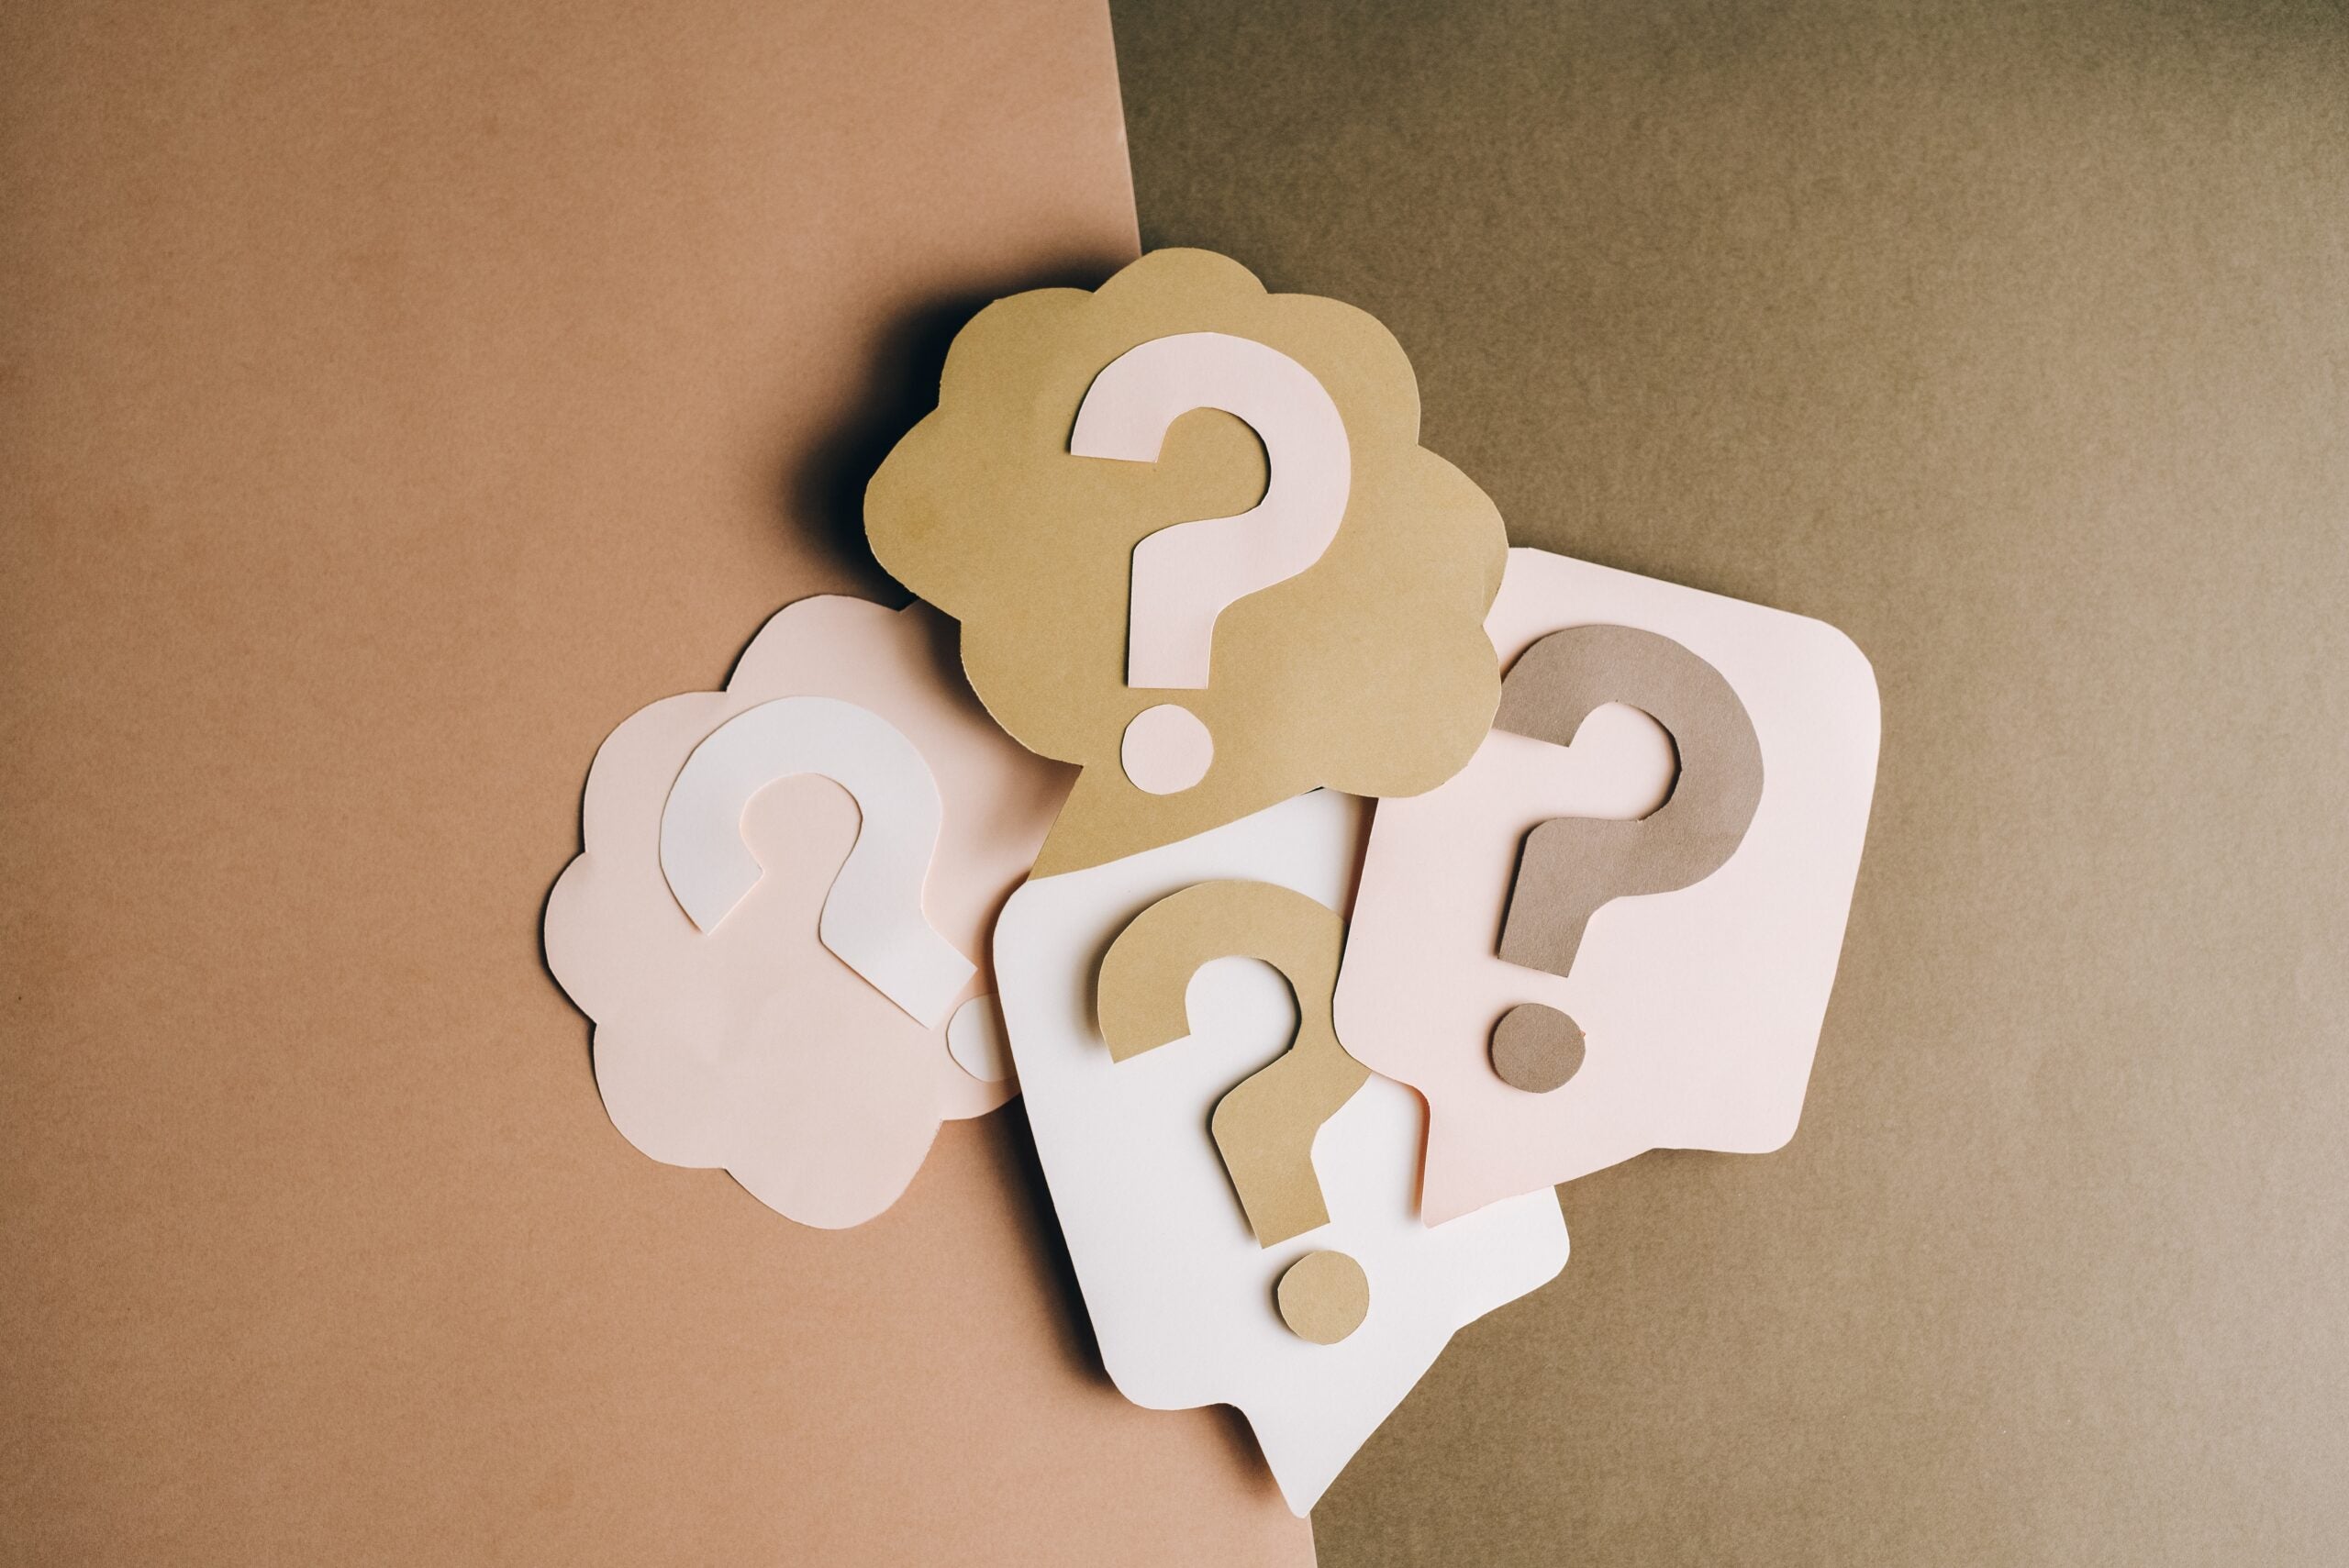 carboard, colorful cutouts of multiple question marks